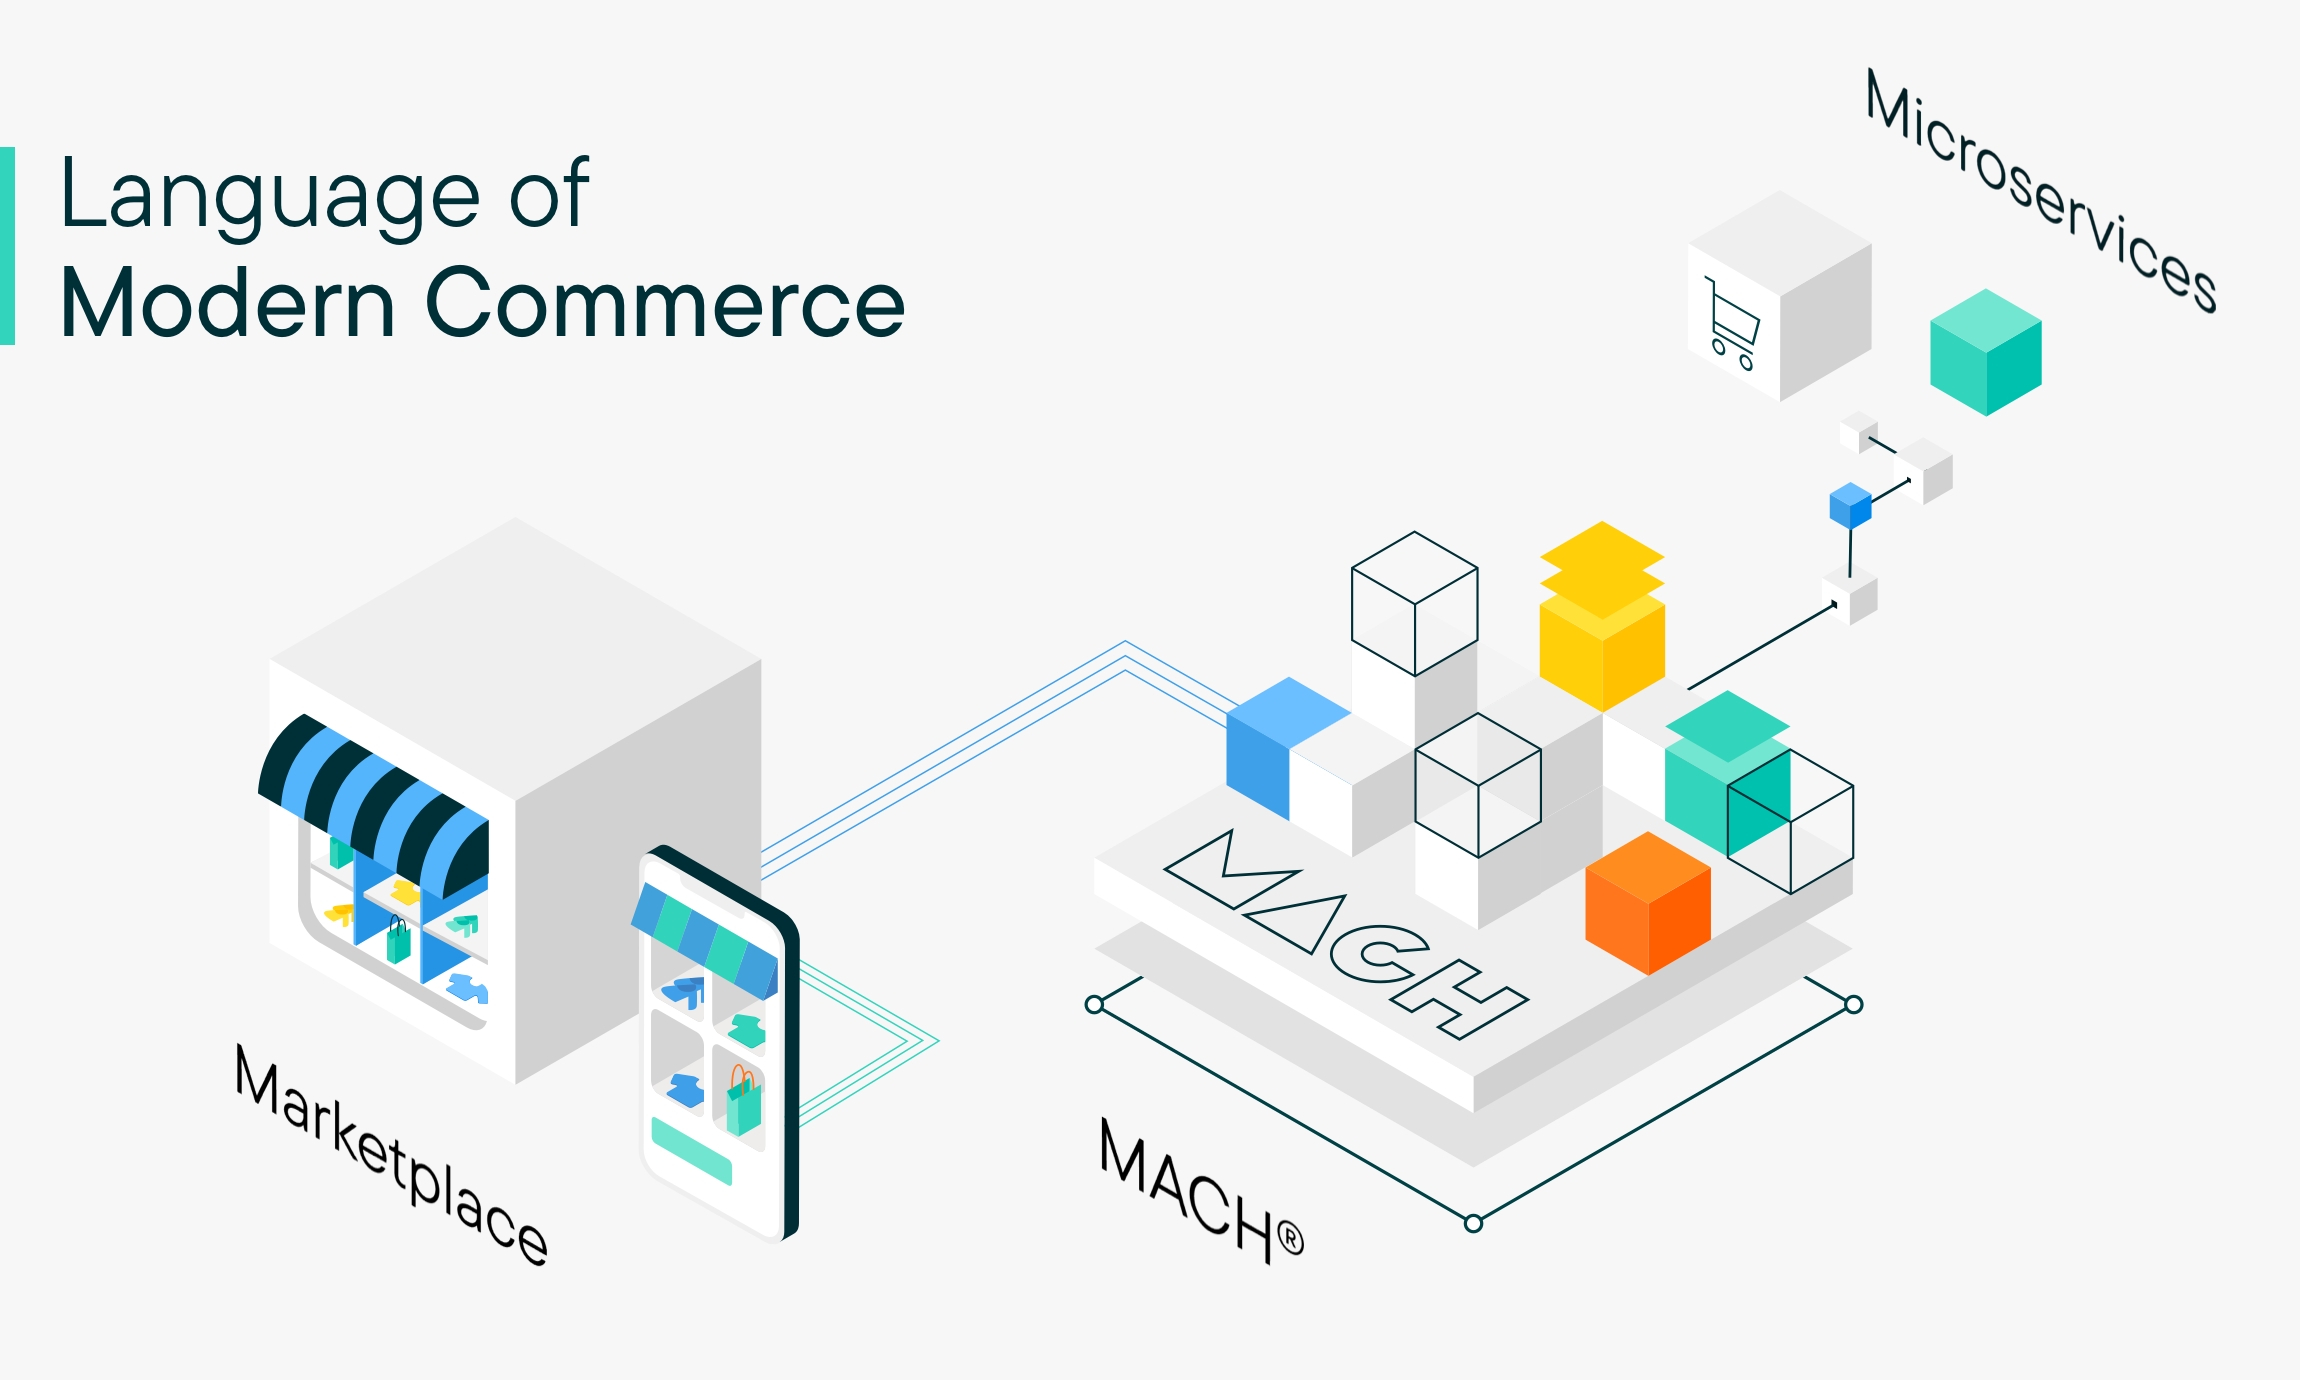 lenguage-of-modern-commerce-mach-marketplace-microservices.png